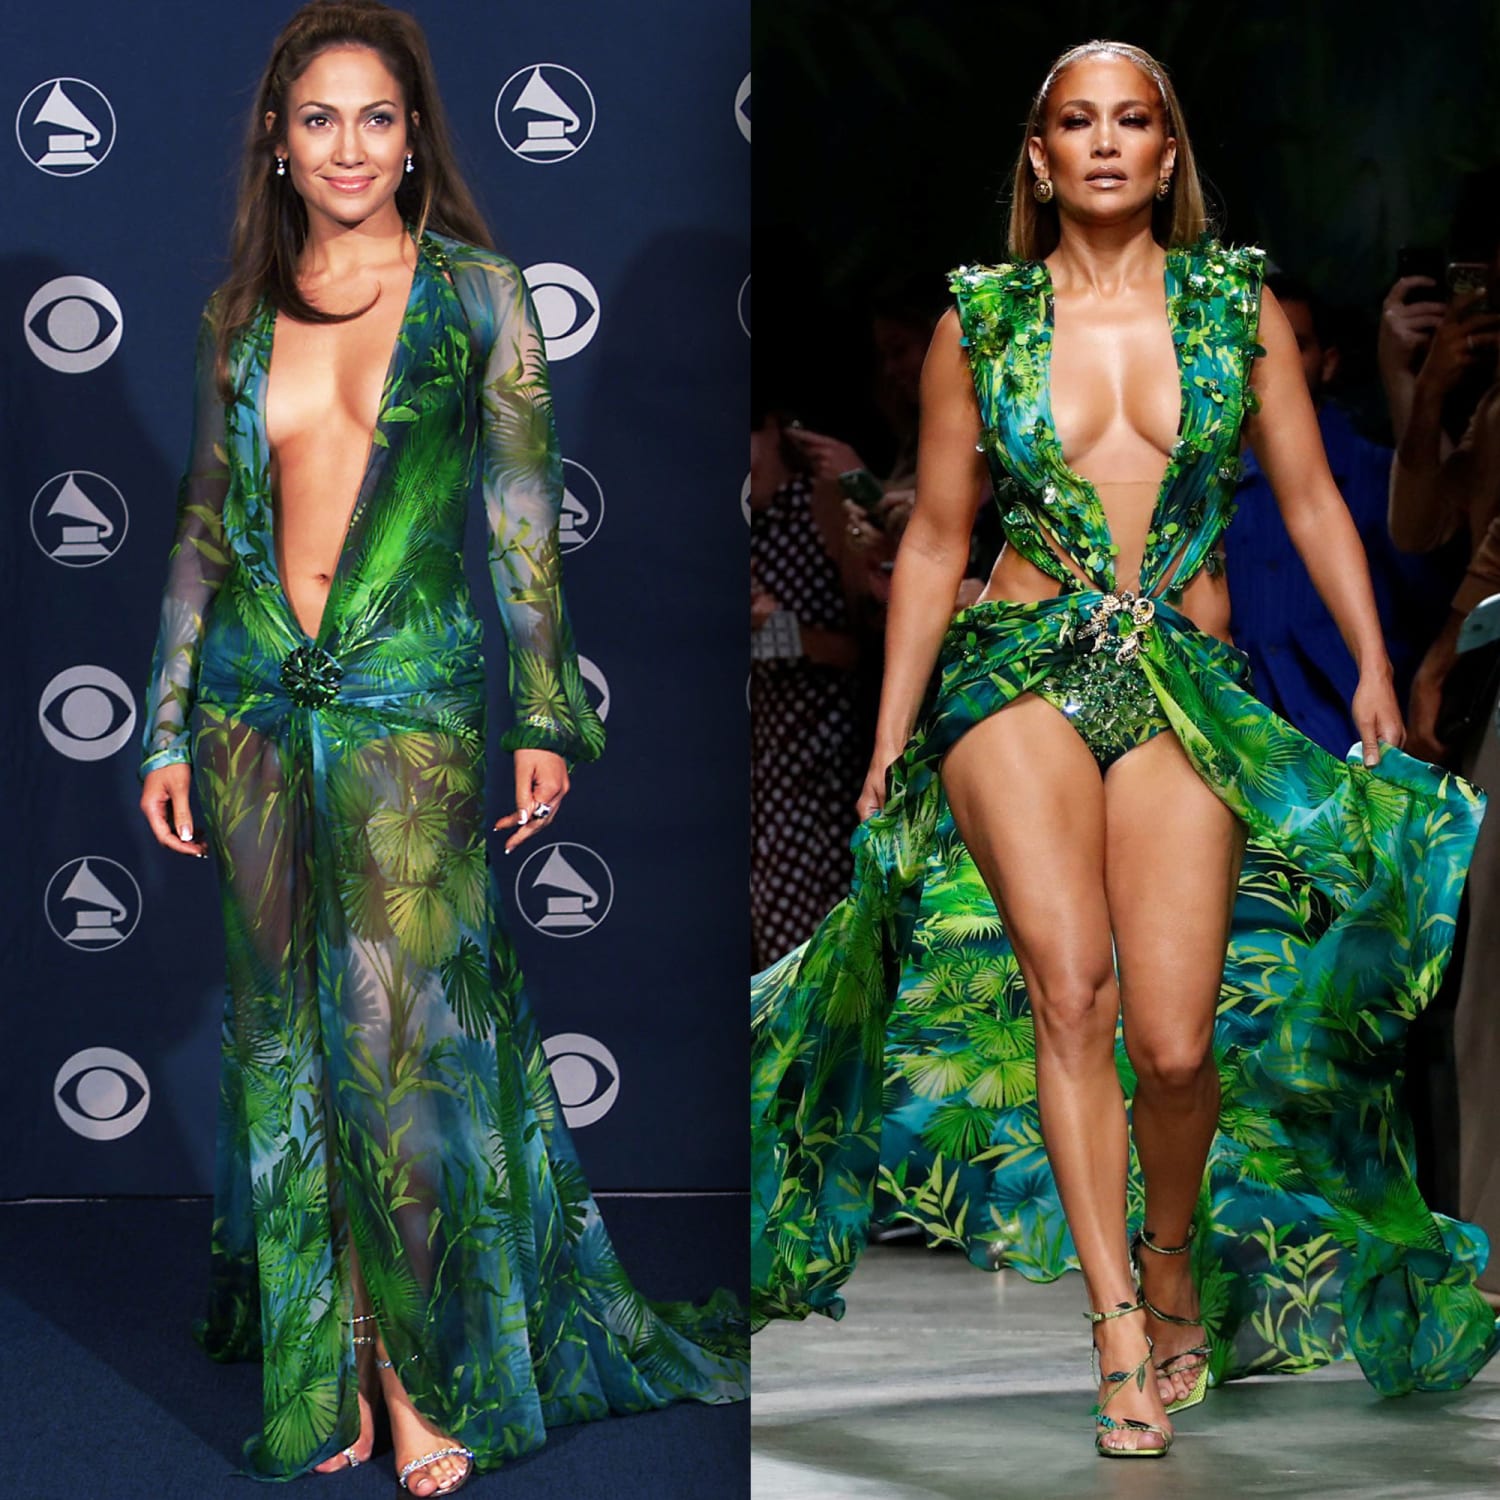 jlo and the green dress